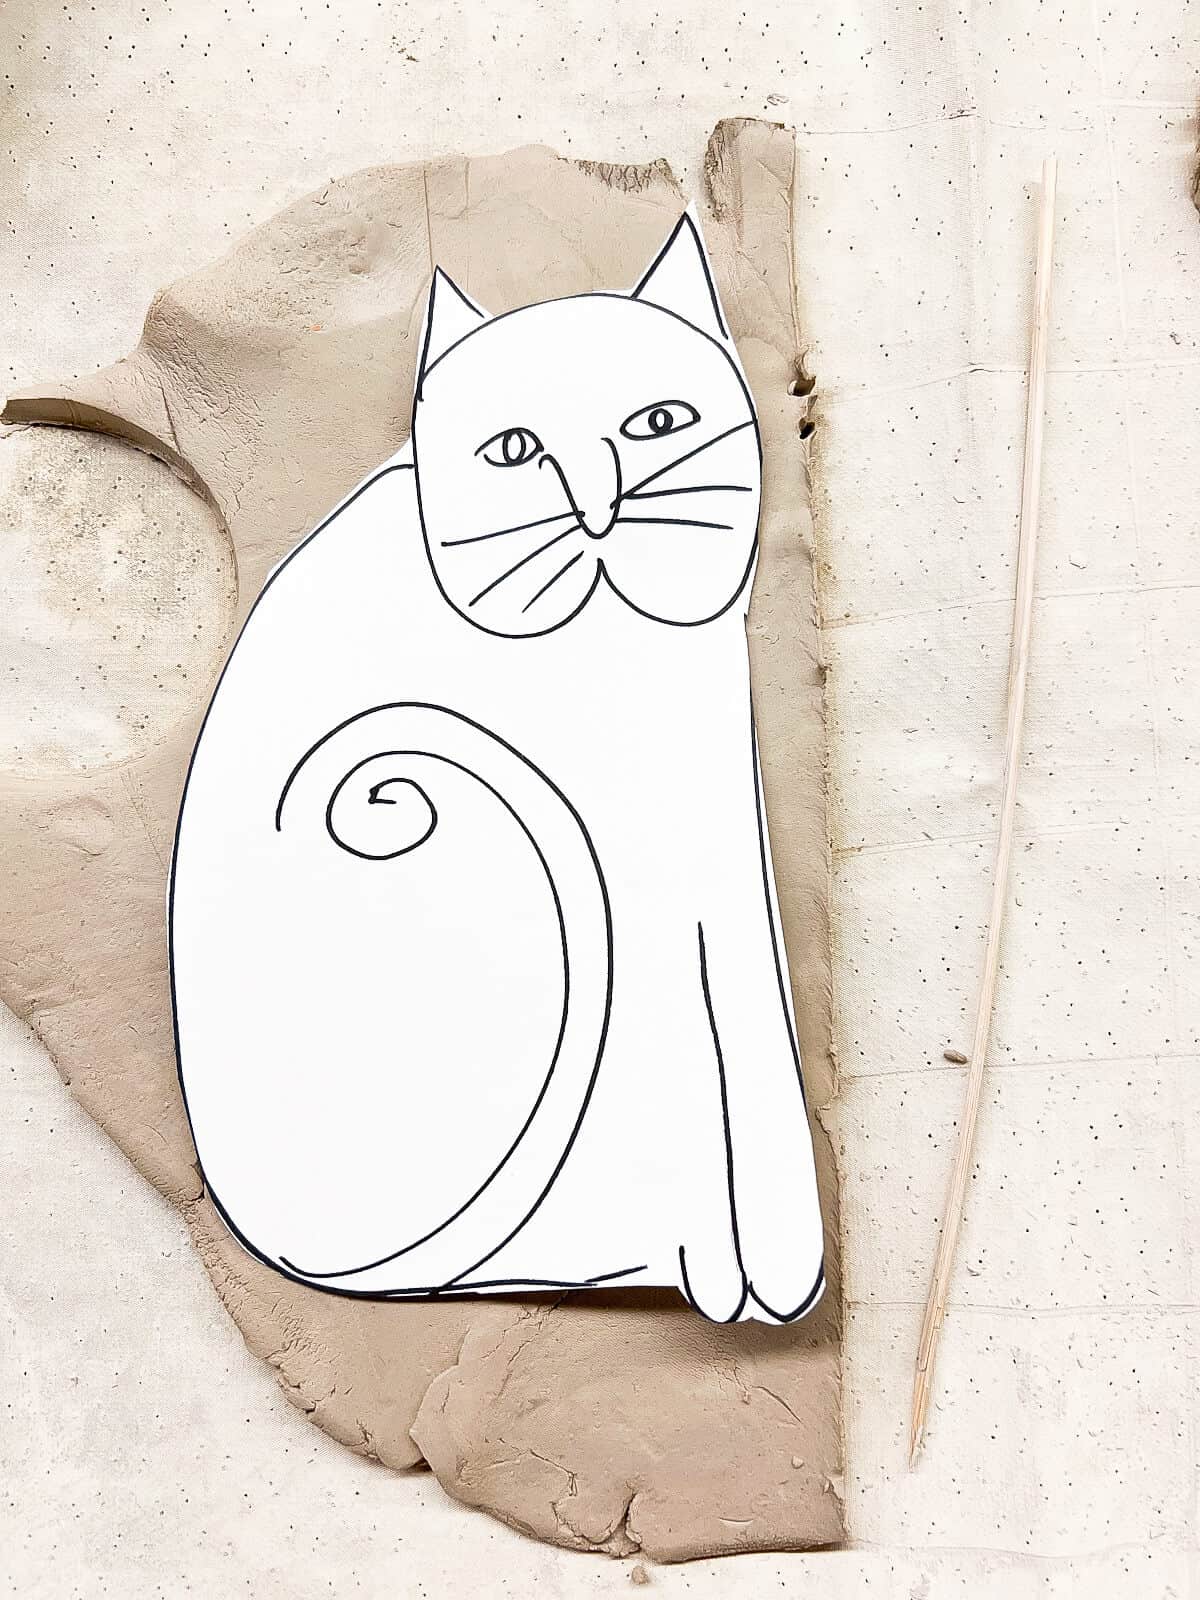 paper template with cat drawn on it on clay slab.